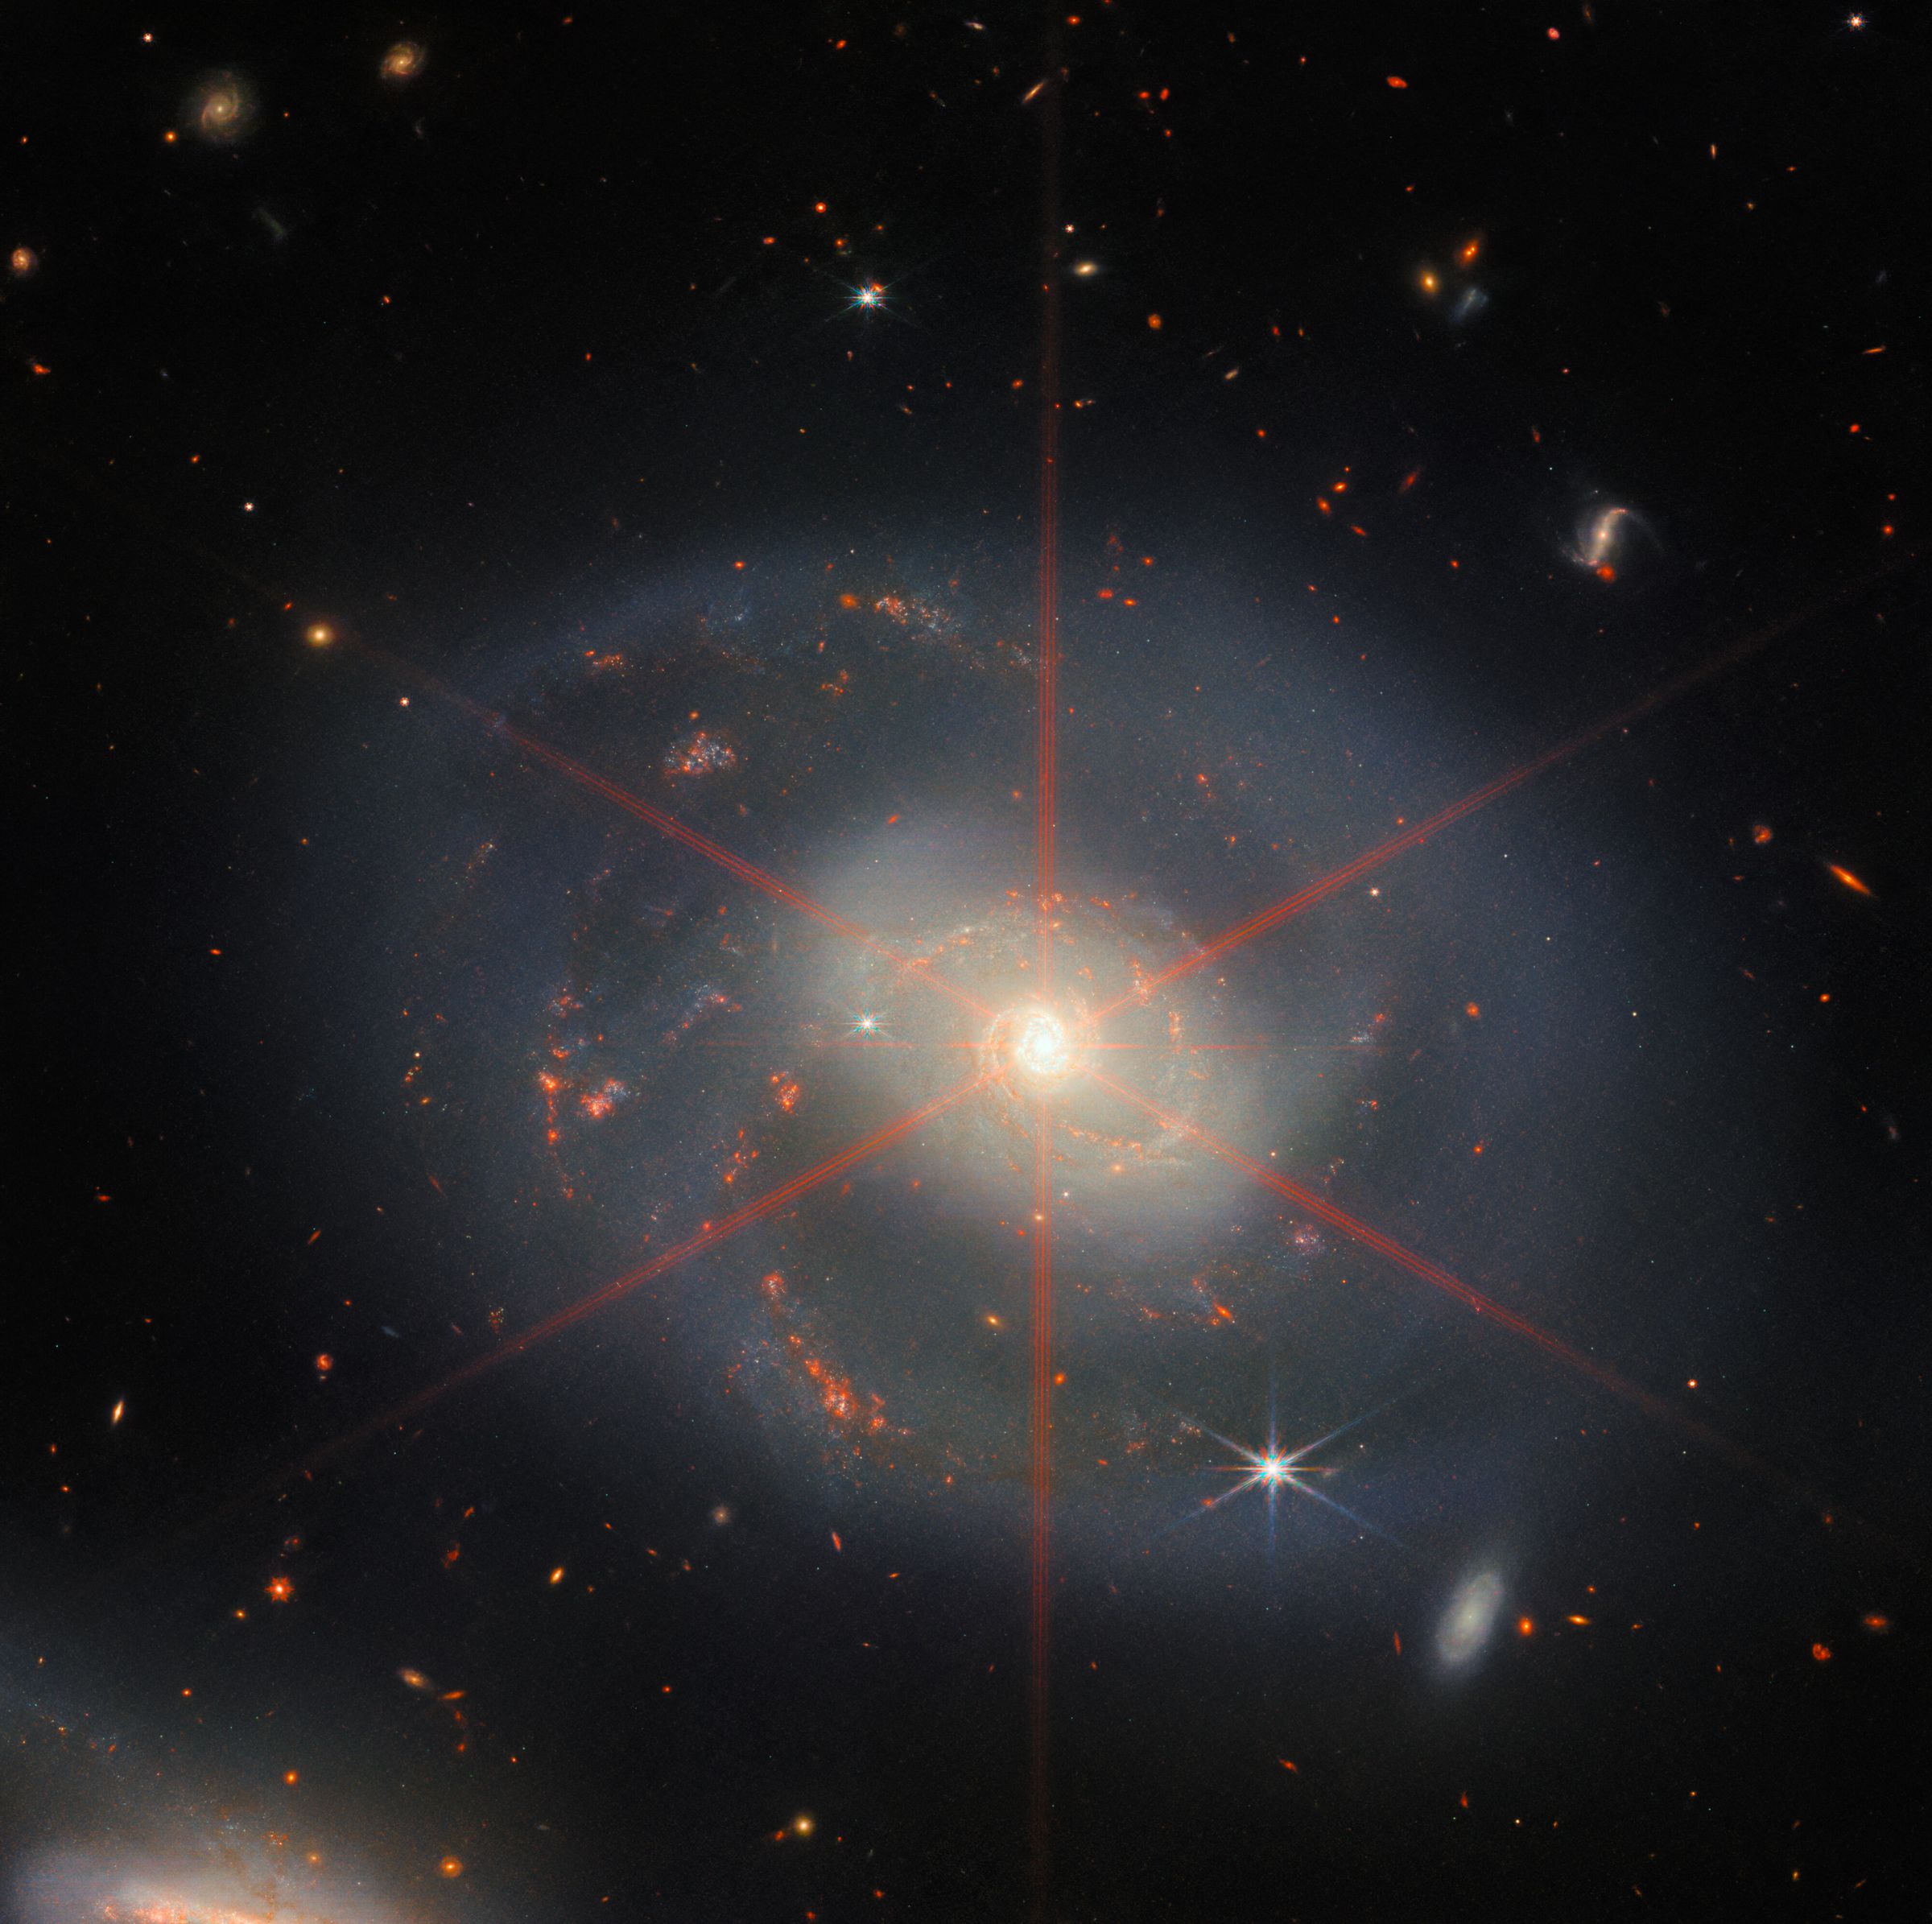 This image shows a spiral galaxy dominated by a bright central region.  The galaxy has blue-purple hues with orange-red areas filled with stars.  Also visible is a large diffraction peak, appearing as a star pattern over the central region of the galaxy.  Many stars and galaxies fill the background scene